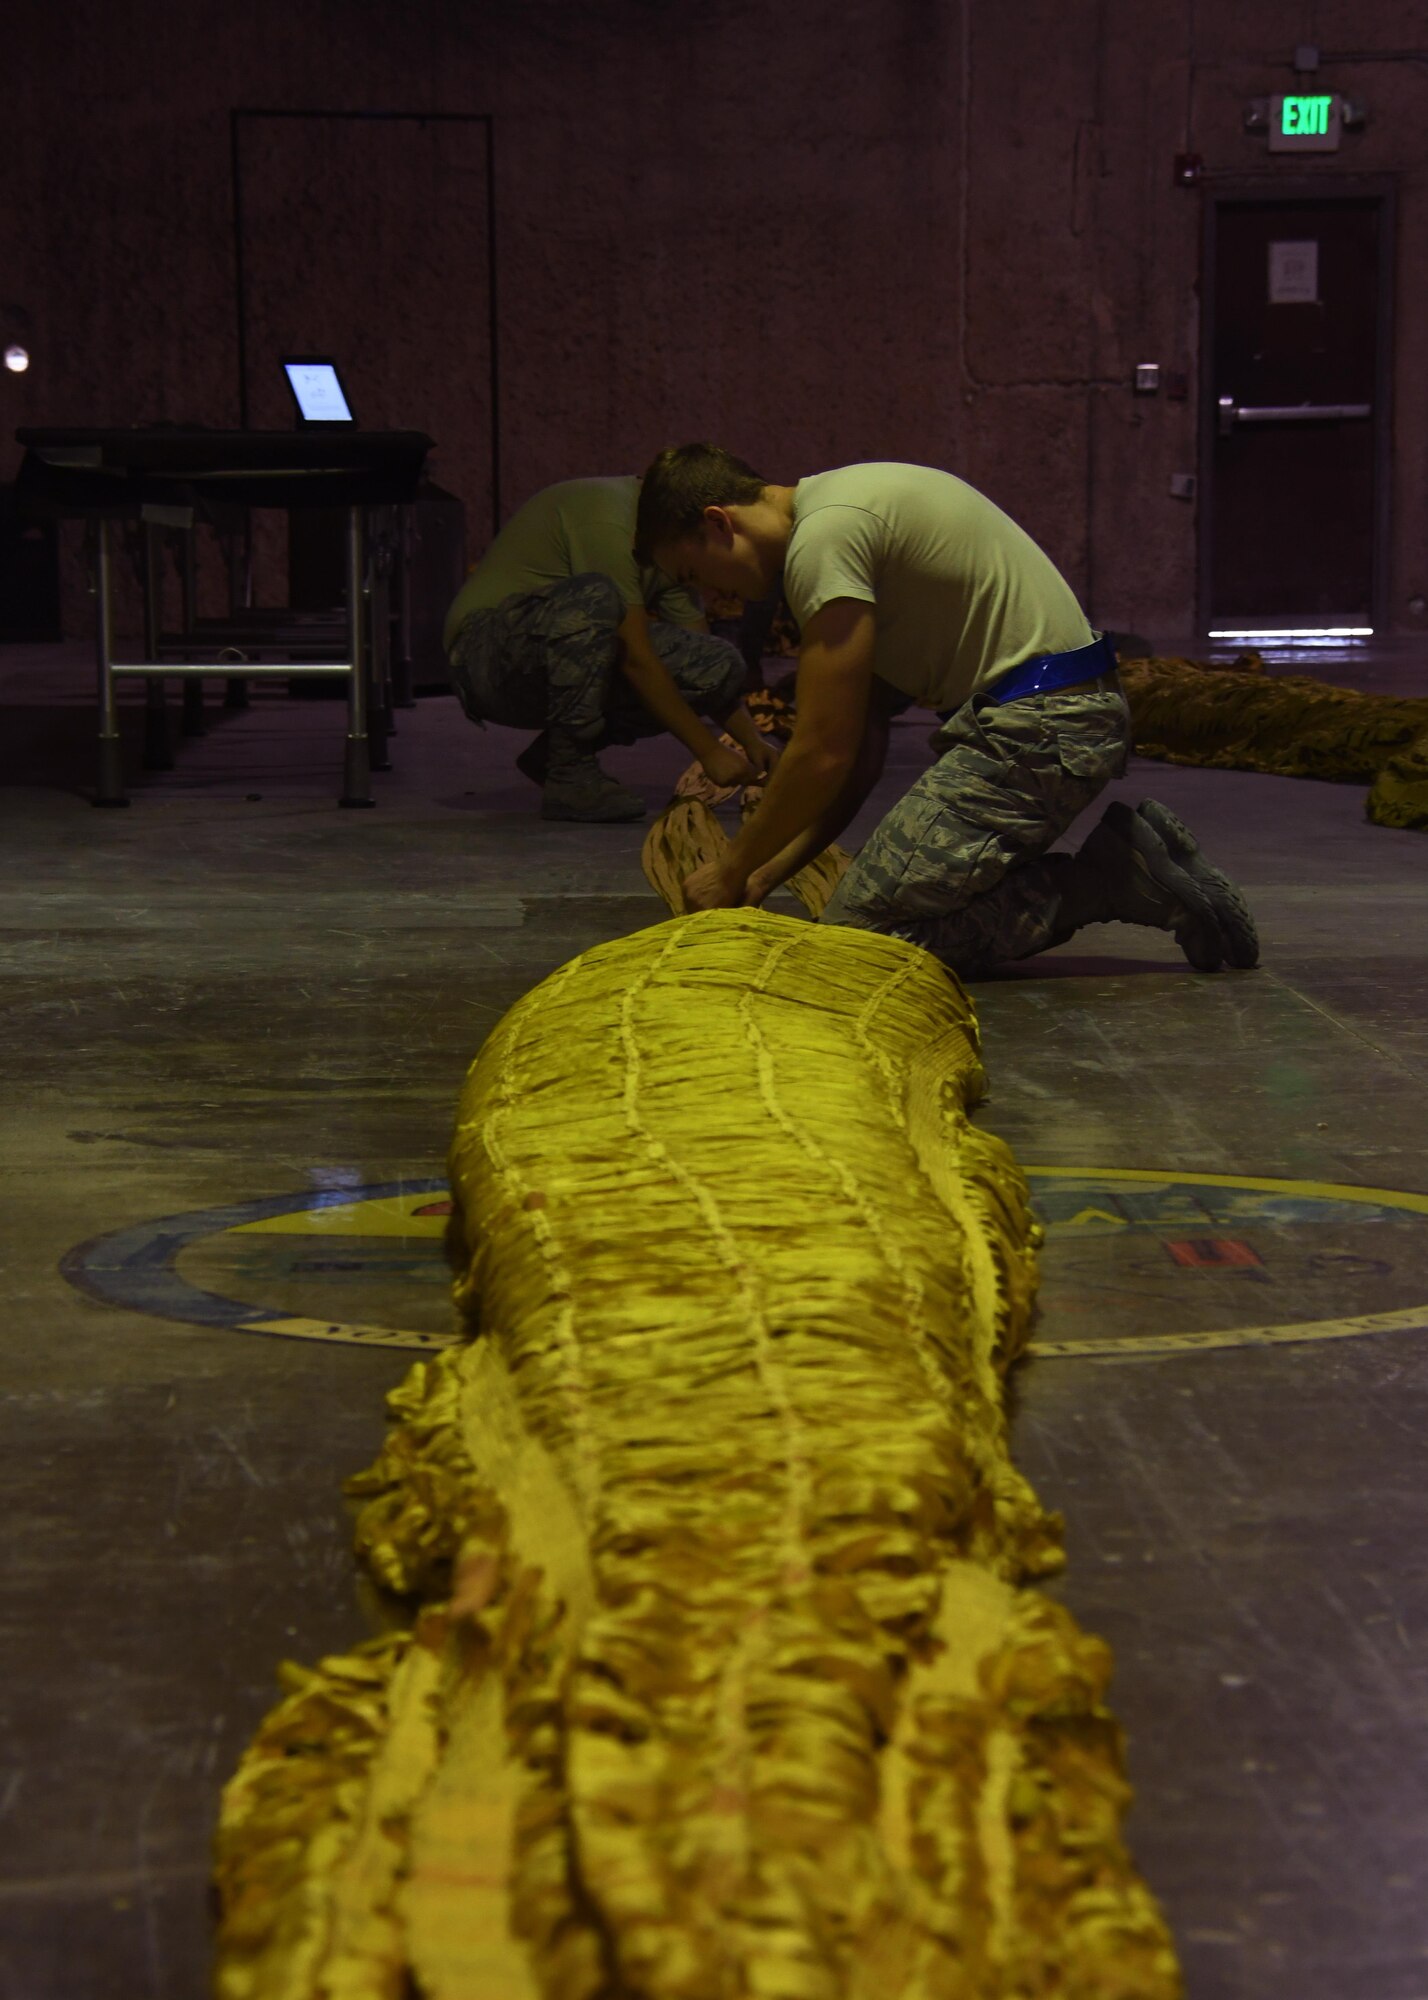 U.S. Airman 1st Class Eric Hornbeck, 379th Expeditionary Operations Support Squadron aircrew flight equipment technician, prepares a drag parachute to be packed into a deployment bag at Al Udeid Air Base, Qatar, Nov. 30, 2016. As part of his duties, Hornbeck ensures that any equipment that may be needed by aircrew in an emergency is inspected and operating correctly. (U.S. Air Force photo by Senior Airman Miles Wilson)